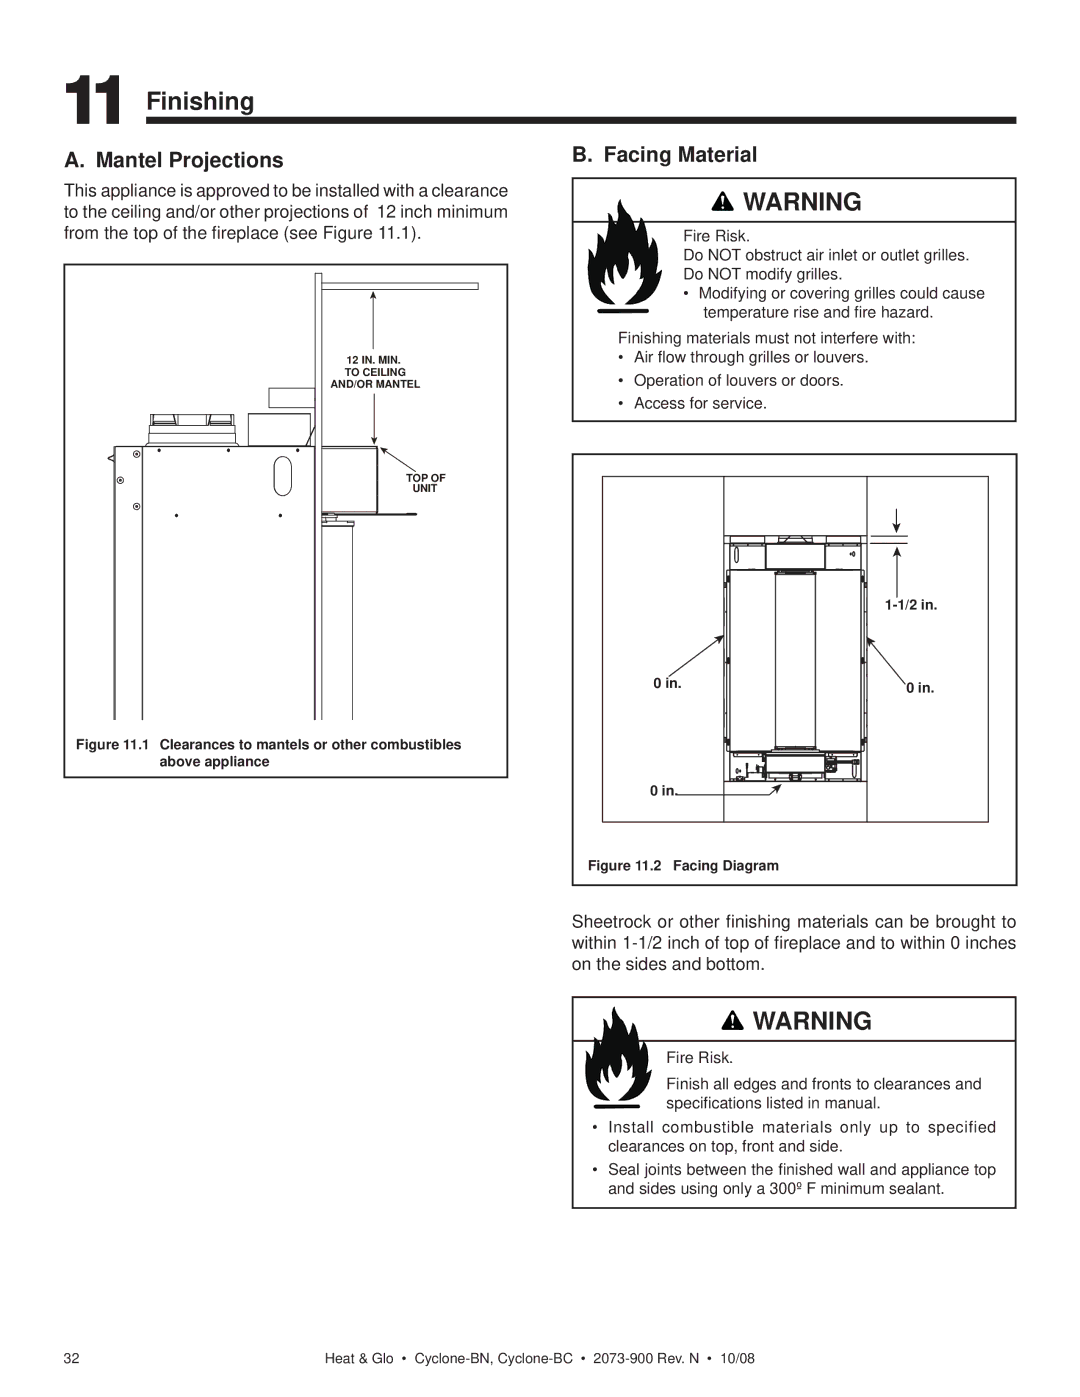 Hearth and Home Technologies Cyclone-BC, Cyclone-BN owner manual Finishing, Facing Material 